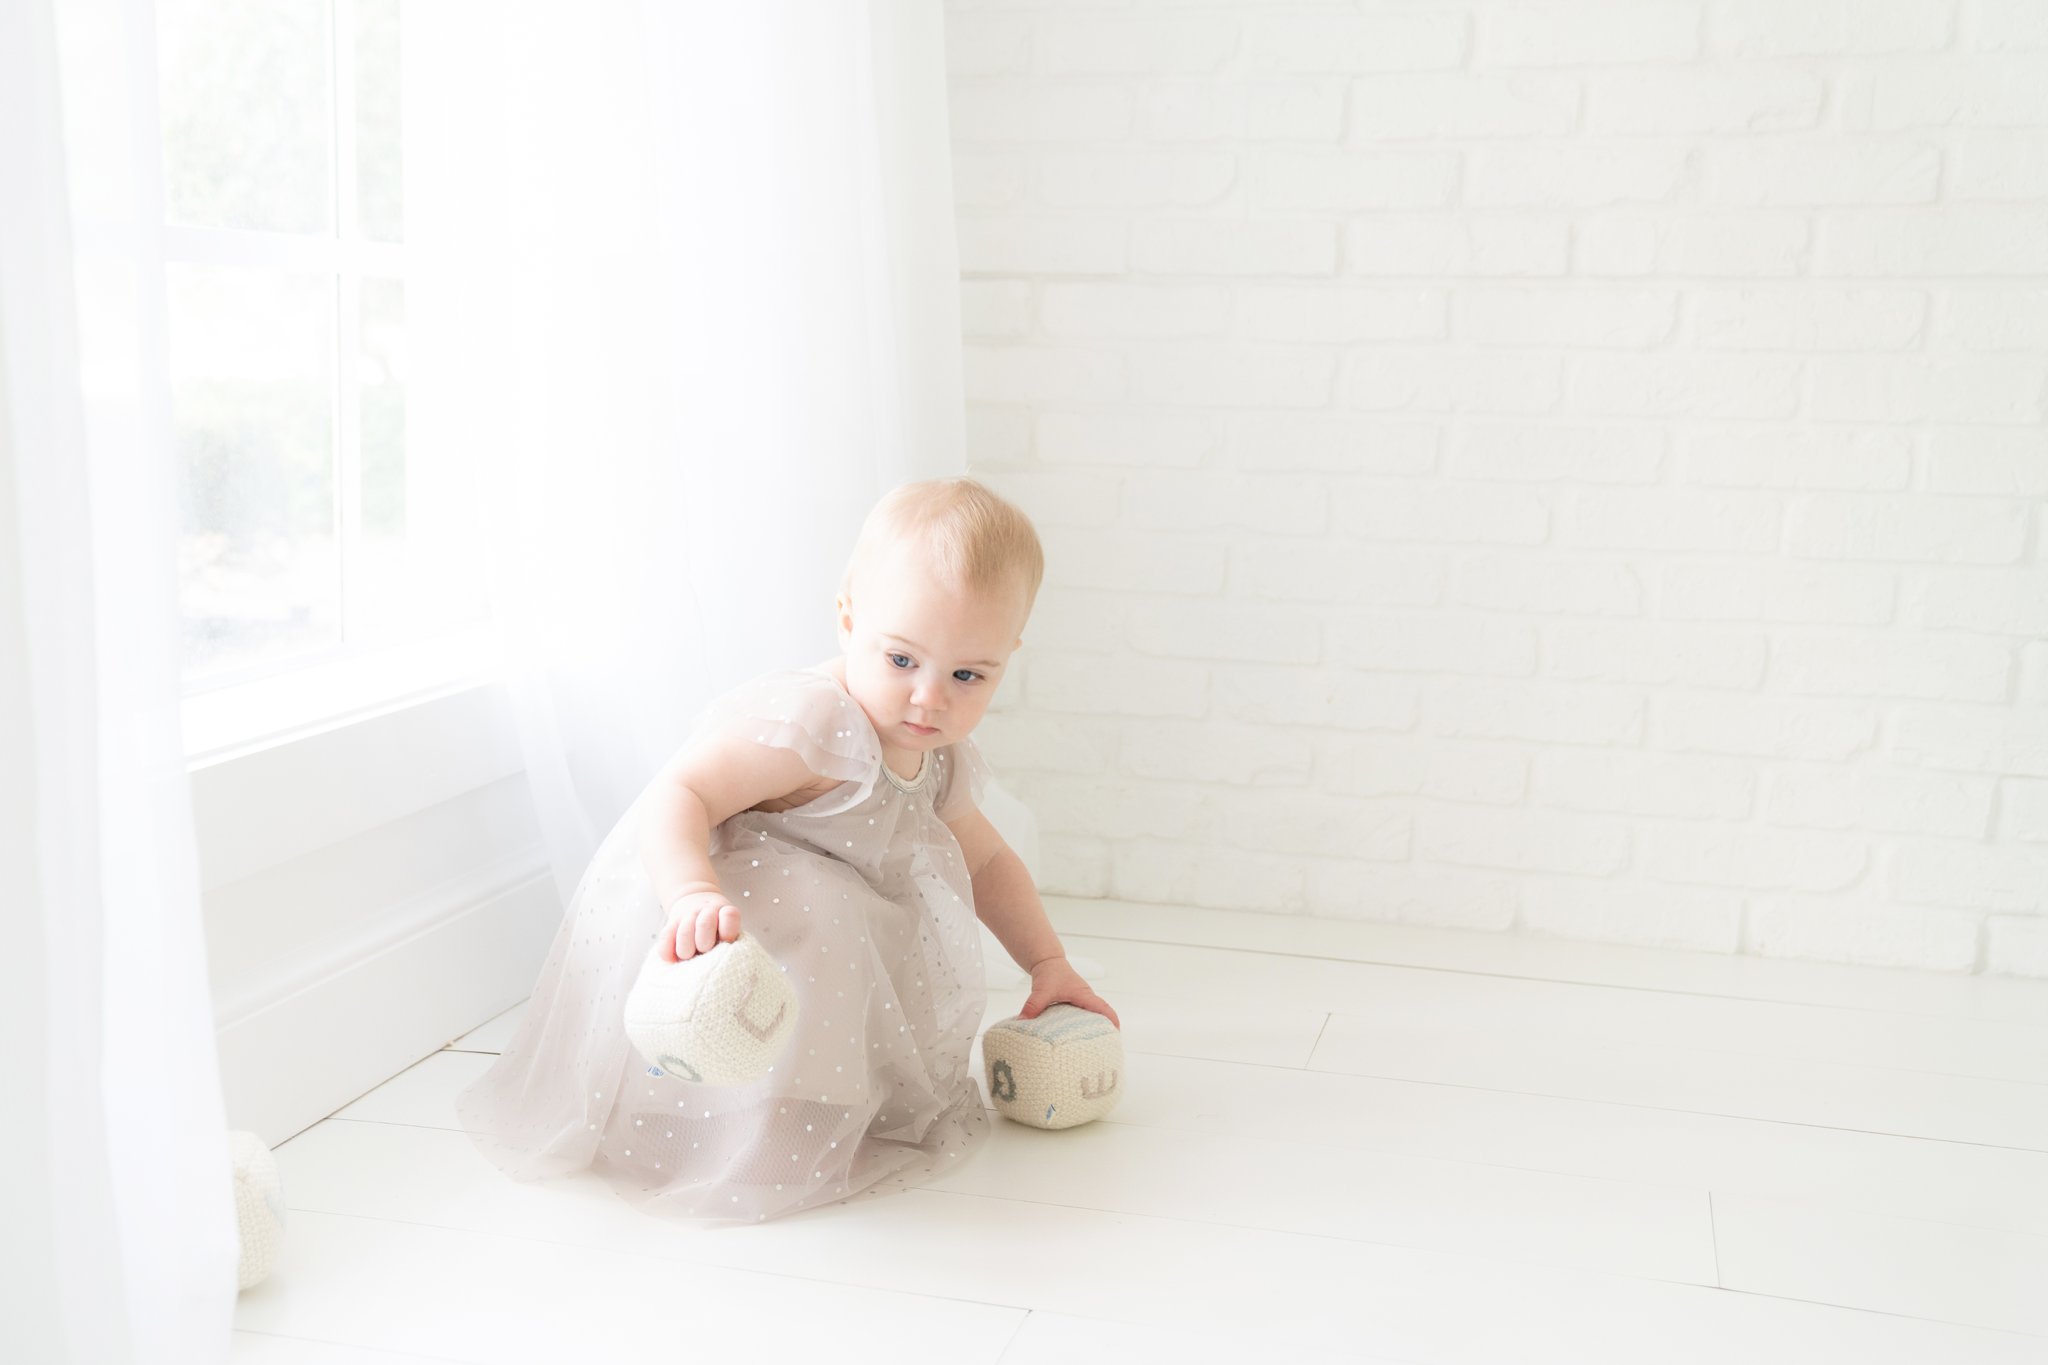 baby in a sparkly silver grey dress by large windows with white curtains jupiter florida photography studio